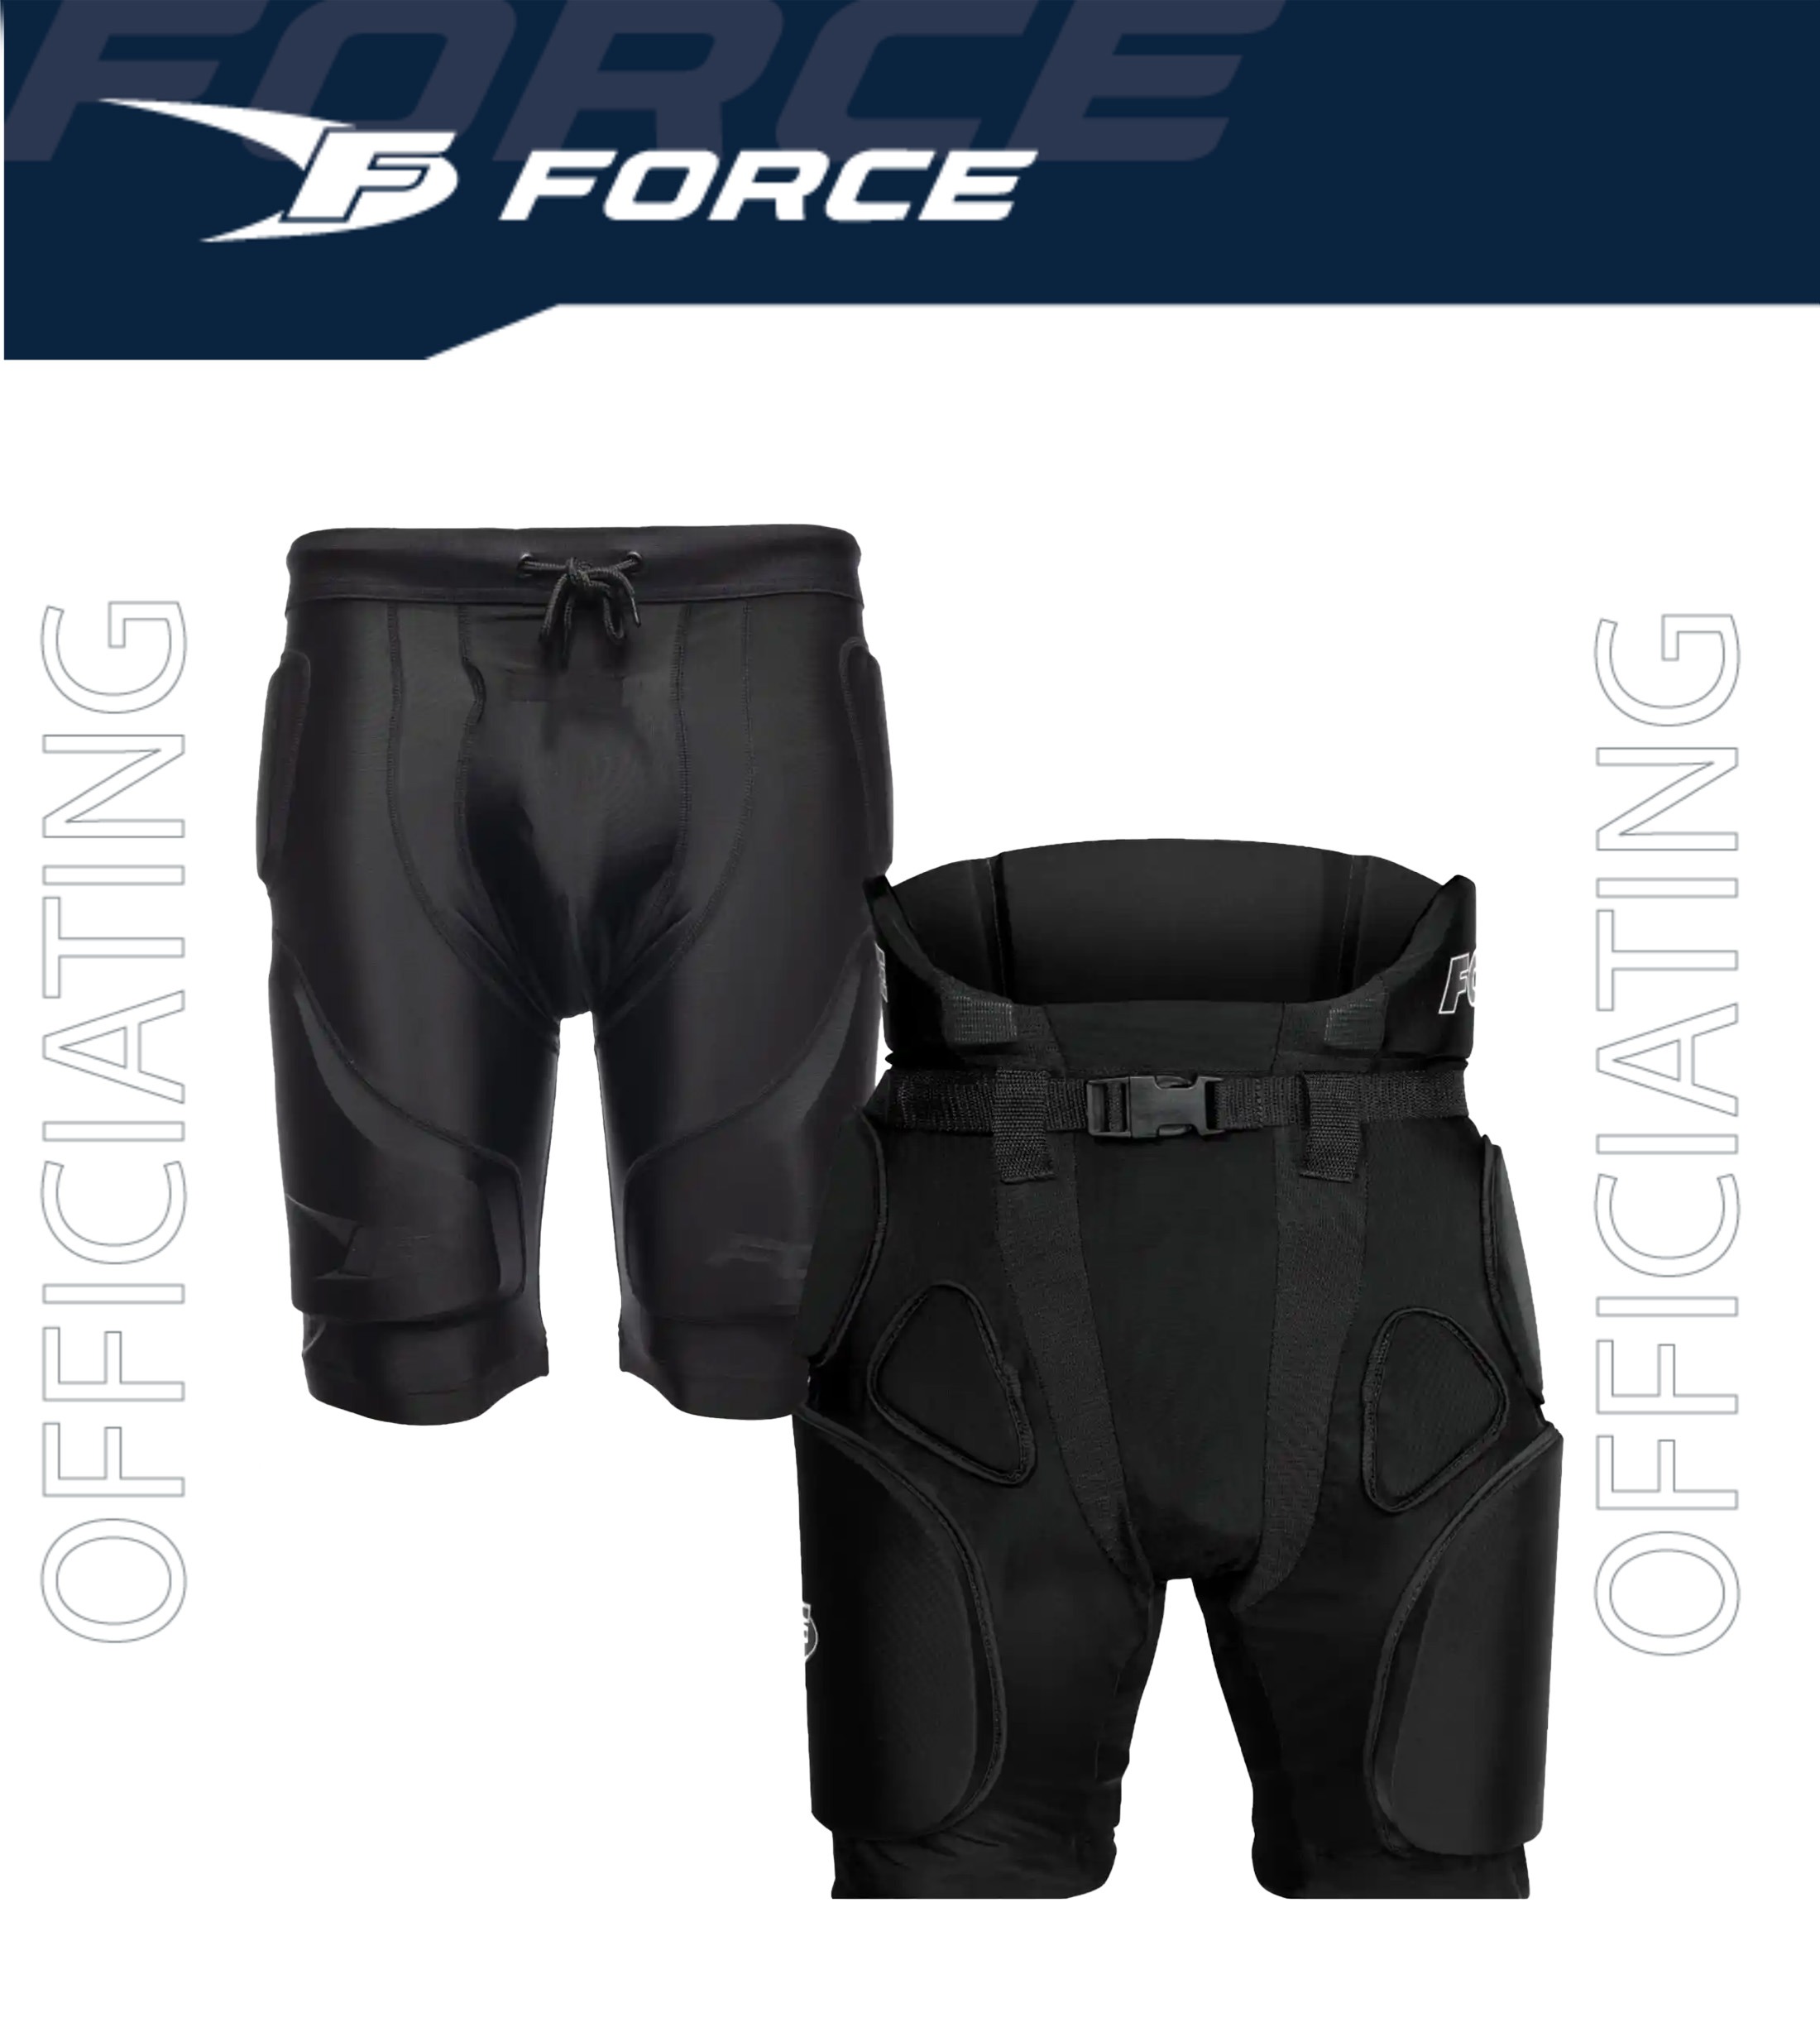 Force Sports / Officiating: Equipment designed by Officials for